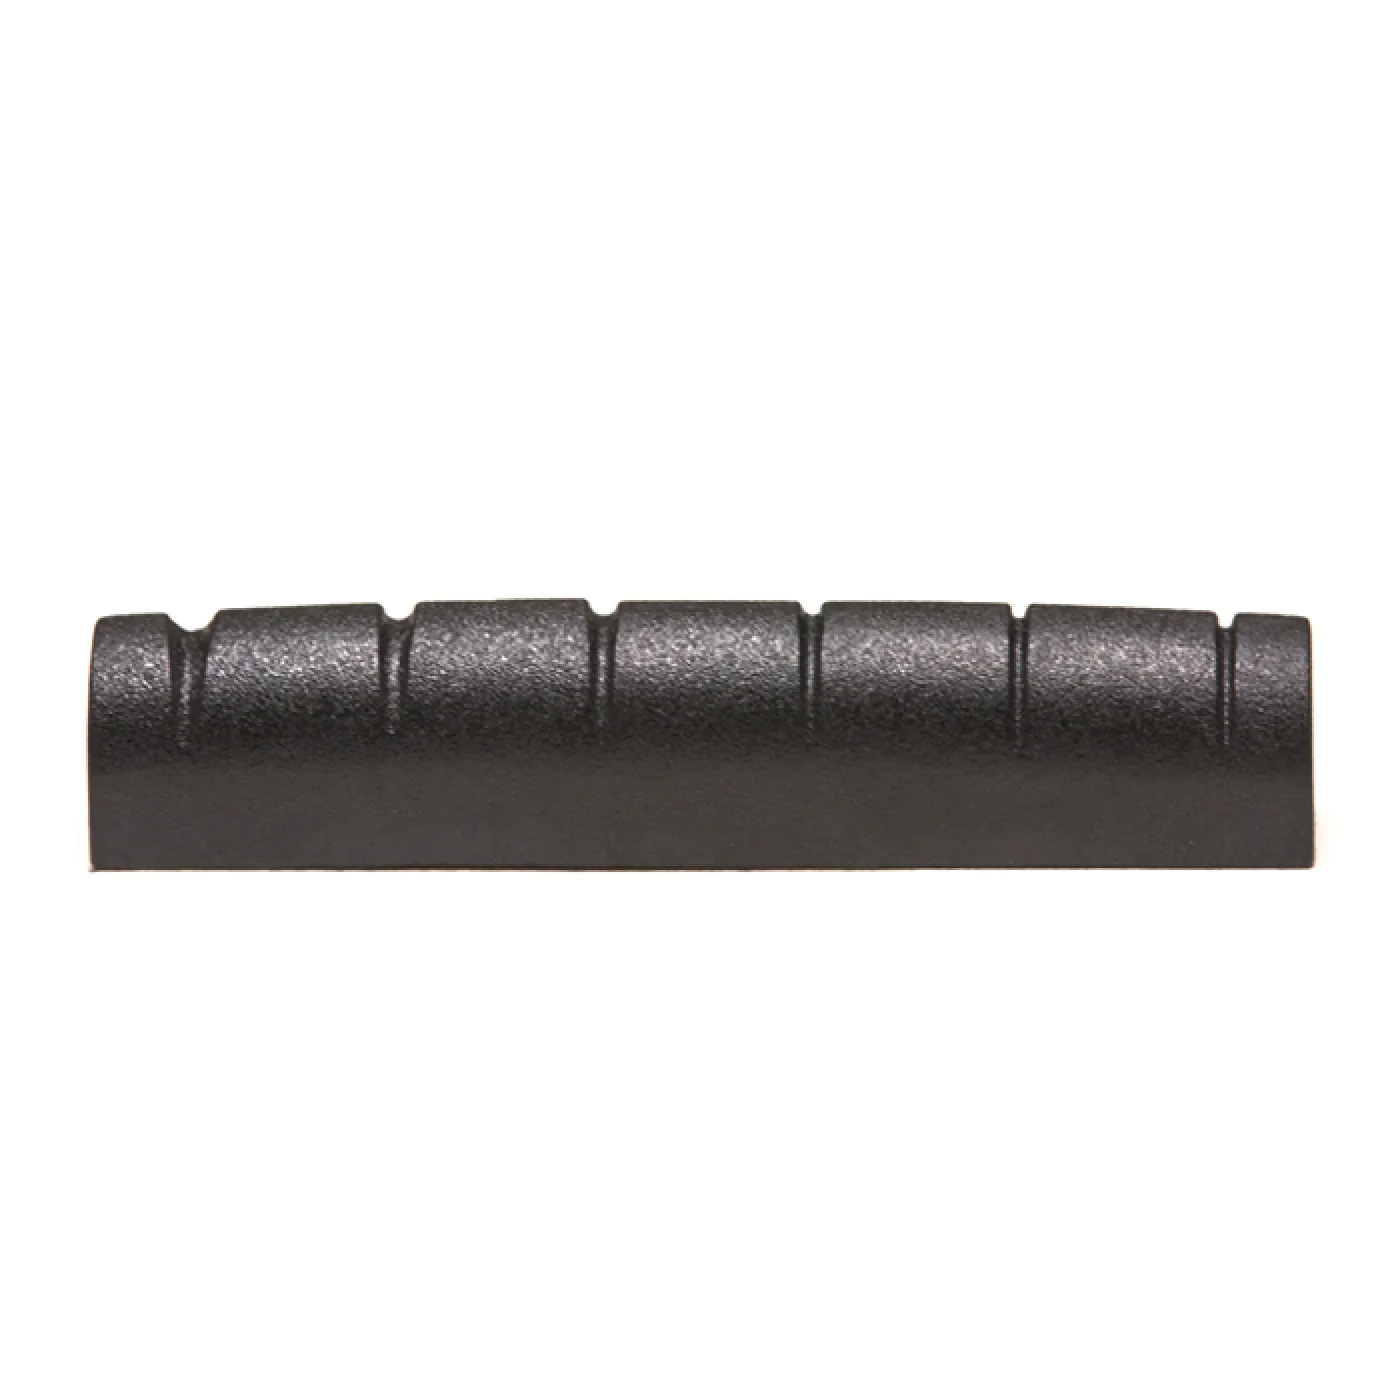 Model 6116-L0 Nut Slotted L43.36mm Lefty (Select Material)